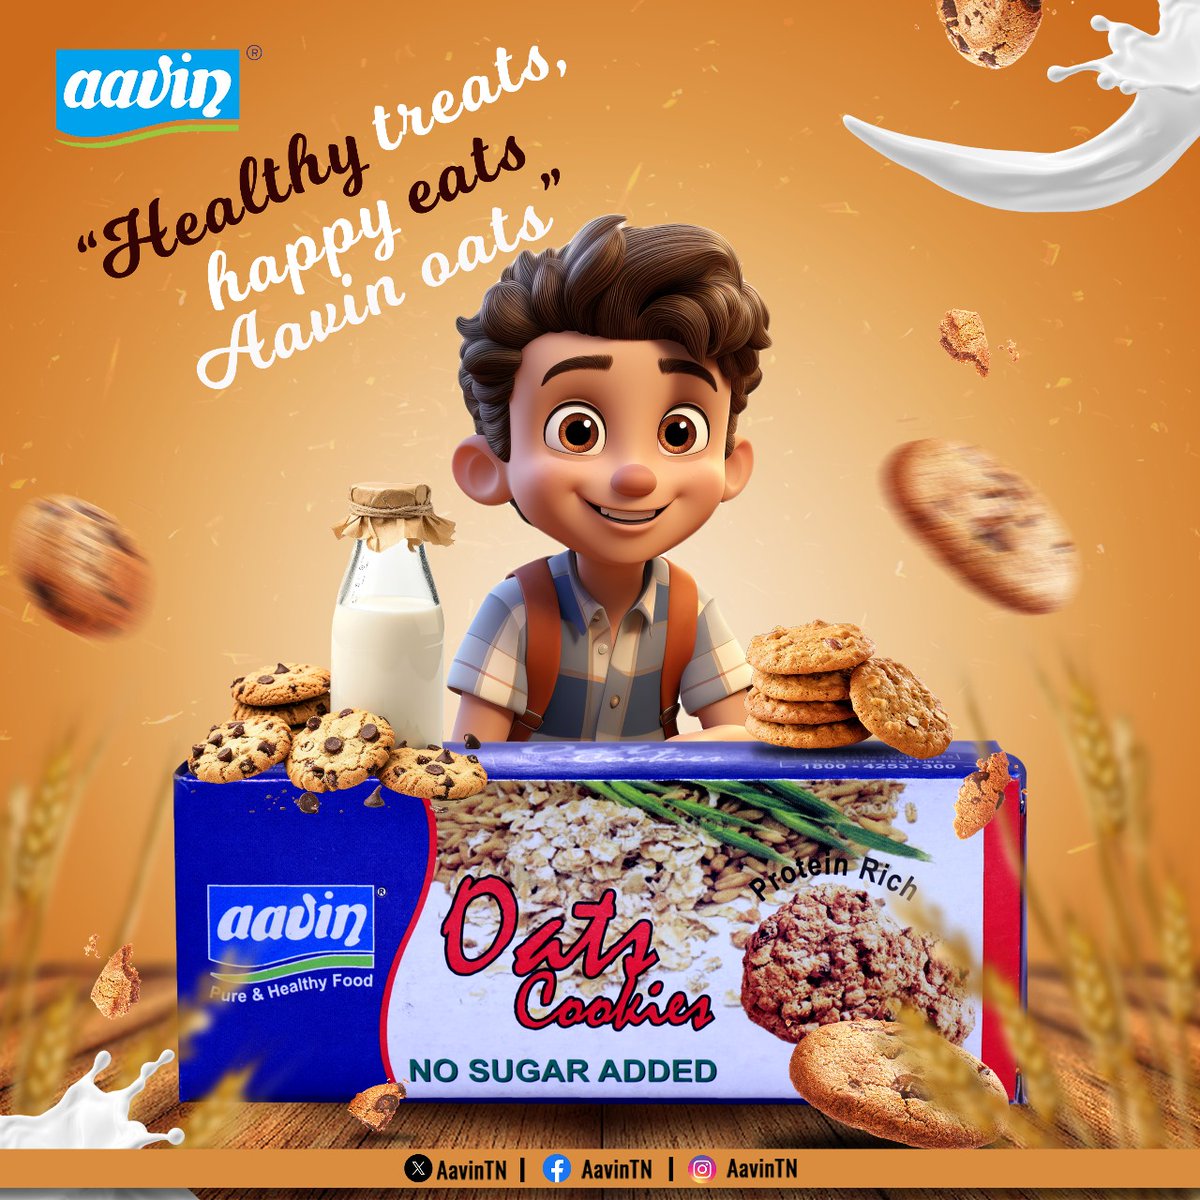 Elevate your snack game with Aavin Oats Biscuits! Crunchy, wholesome, and oh-so-delicious. The perfect guilt-free treat for any time of the day. #AavinOatsBiscuits #HealthySnacking #CrunchyGoodness #Aavin #AavinTN #AavinProducts